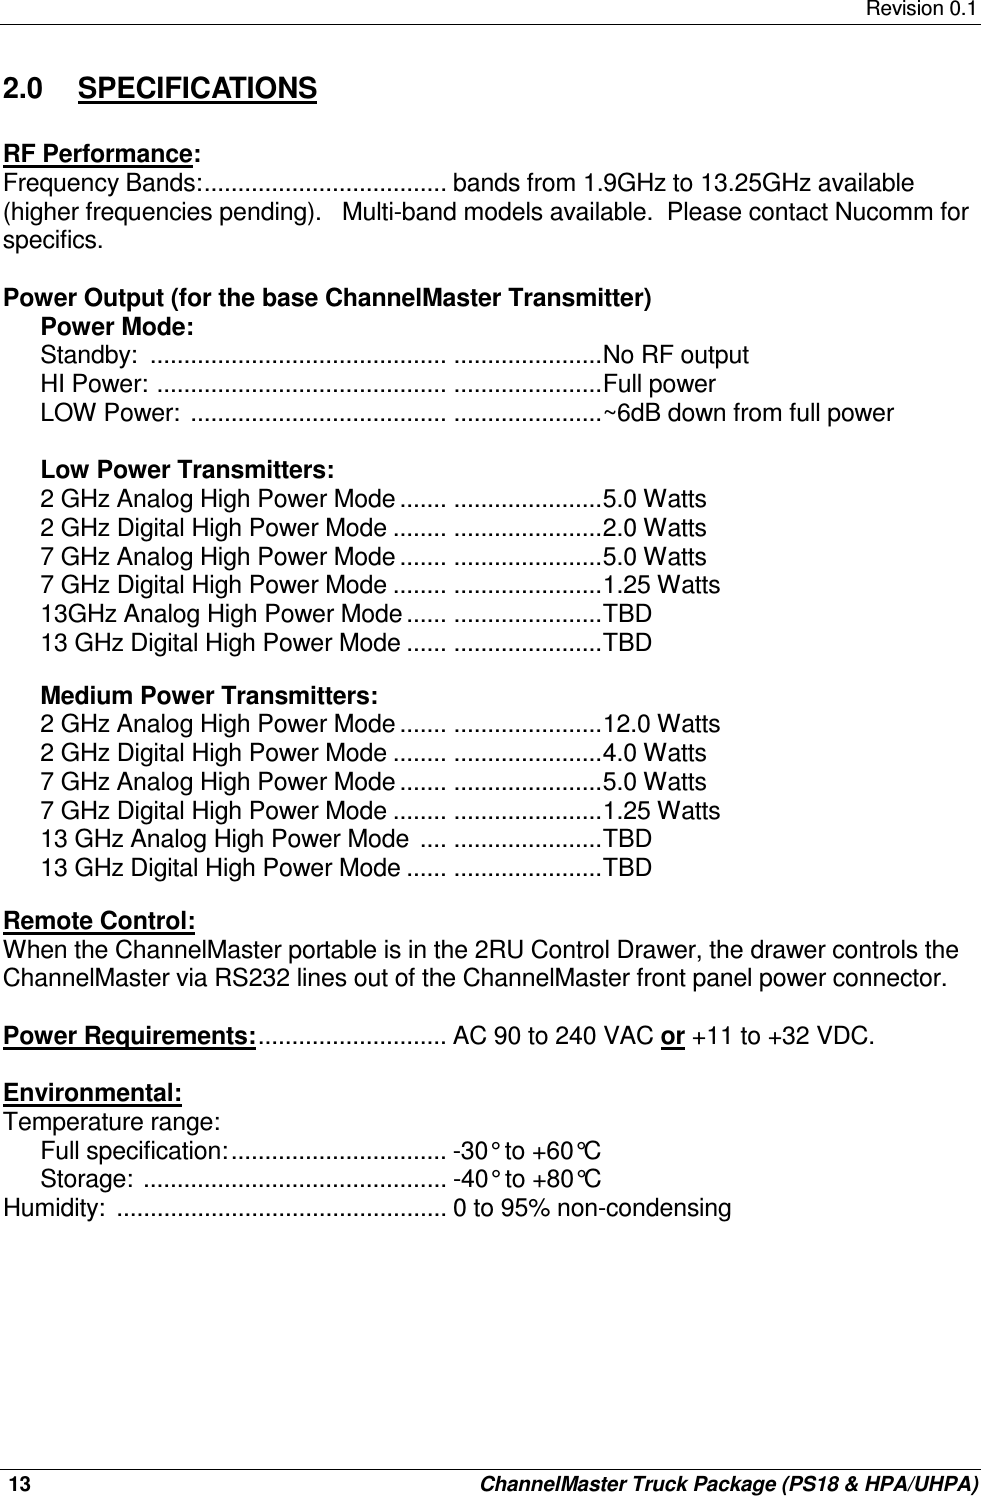     Revision 0.1  13    ChannelMaster Truck Package (PS18 &amp; HPA/UHPA) 2.0  SPECIFICATIONS  RF Performance: Frequency Bands:.................................... bands from 1.9GHz to 13.25GHz available (higher frequencies pending).   Multi-band models available.  Please contact Nucomm for specifics.  Power Output (for the base ChannelMaster Transmitter)  Power Mode: Standby:  ............................................ ......................No RF output HI Power: ........................................... ......................Full power LOW Power:  ...................................... ......................~6dB down from full power  Low Power Transmitters:  2 GHz Analog High Power Mode ....... ......................5.0 Watts 2 GHz Digital High Power Mode ........ ......................2.0 Watts 7 GHz Analog High Power Mode ....... ......................5.0 Watts 7 GHz Digital High Power Mode ........ ......................1.25 Watts 13GHz Analog High Power Mode ...... ......................TBD 13 GHz Digital High Power Mode ...... ......................TBD  Medium Power Transmitters: 2 GHz Analog High Power Mode ....... ......................12.0 Watts 2 GHz Digital High Power Mode ........ ......................4.0 Watts 7 GHz Analog High Power Mode ....... ......................5.0 Watts 7 GHz Digital High Power Mode ........ ......................1.25 Watts 13 GHz Analog High Power Mode  .... ......................TBD 13 GHz Digital High Power Mode ...... ......................TBD  Remote Control: When the ChannelMaster portable is in the 2RU Control Drawer, the drawer controls the ChannelMaster via RS232 lines out of the ChannelMaster front panel power connector.  Power Requirements:............................ AC 90 to 240 VAC or +11 to +32 VDC.  Environmental: Temperature range: Full specification:................................ -30° to +60°C Storage: ............................................. -40° to +80°C Humidity:  ................................................. 0 to 95% non-condensing         